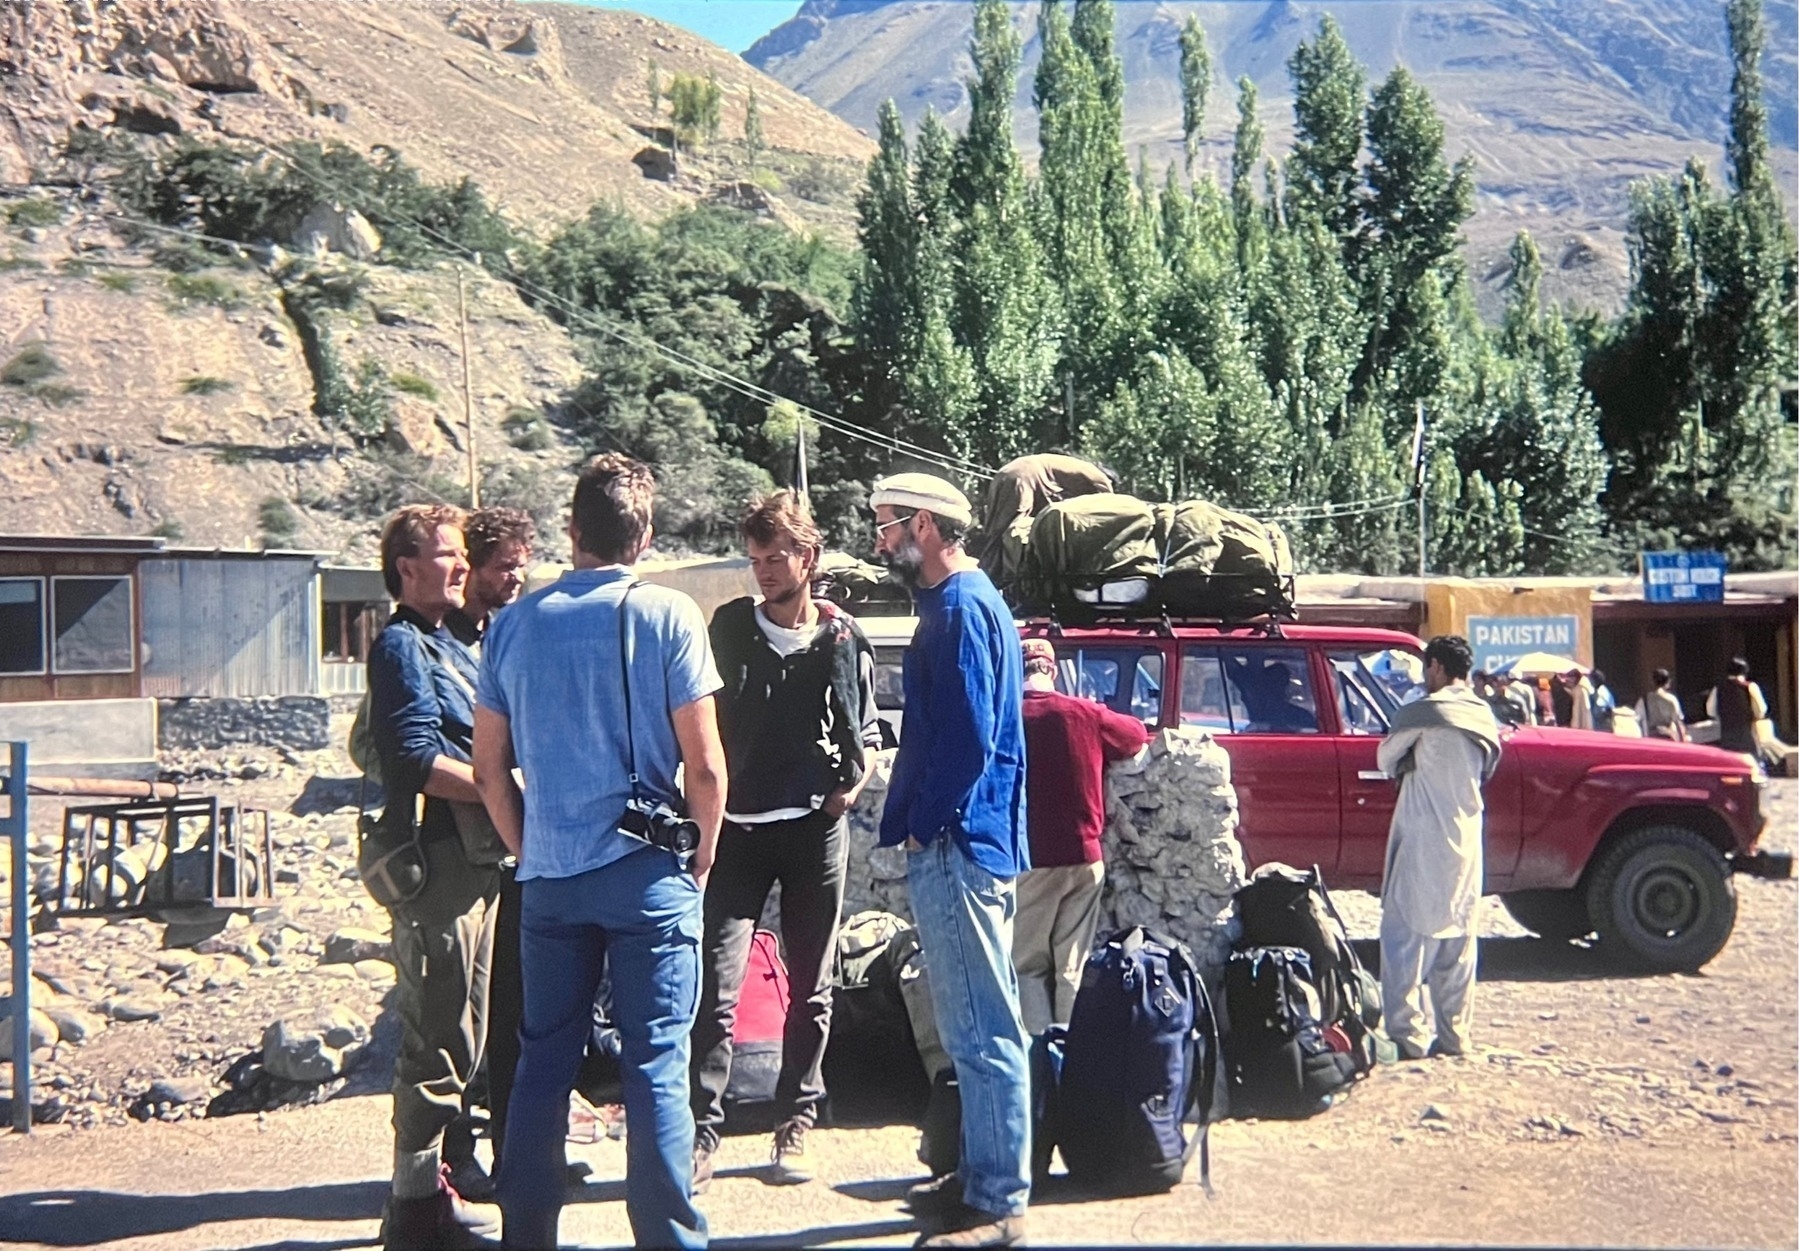 A group of western backpackers standing talking at the Pakistan border post, high in the dry mountains, a few trees and a red vehicle stand near by.